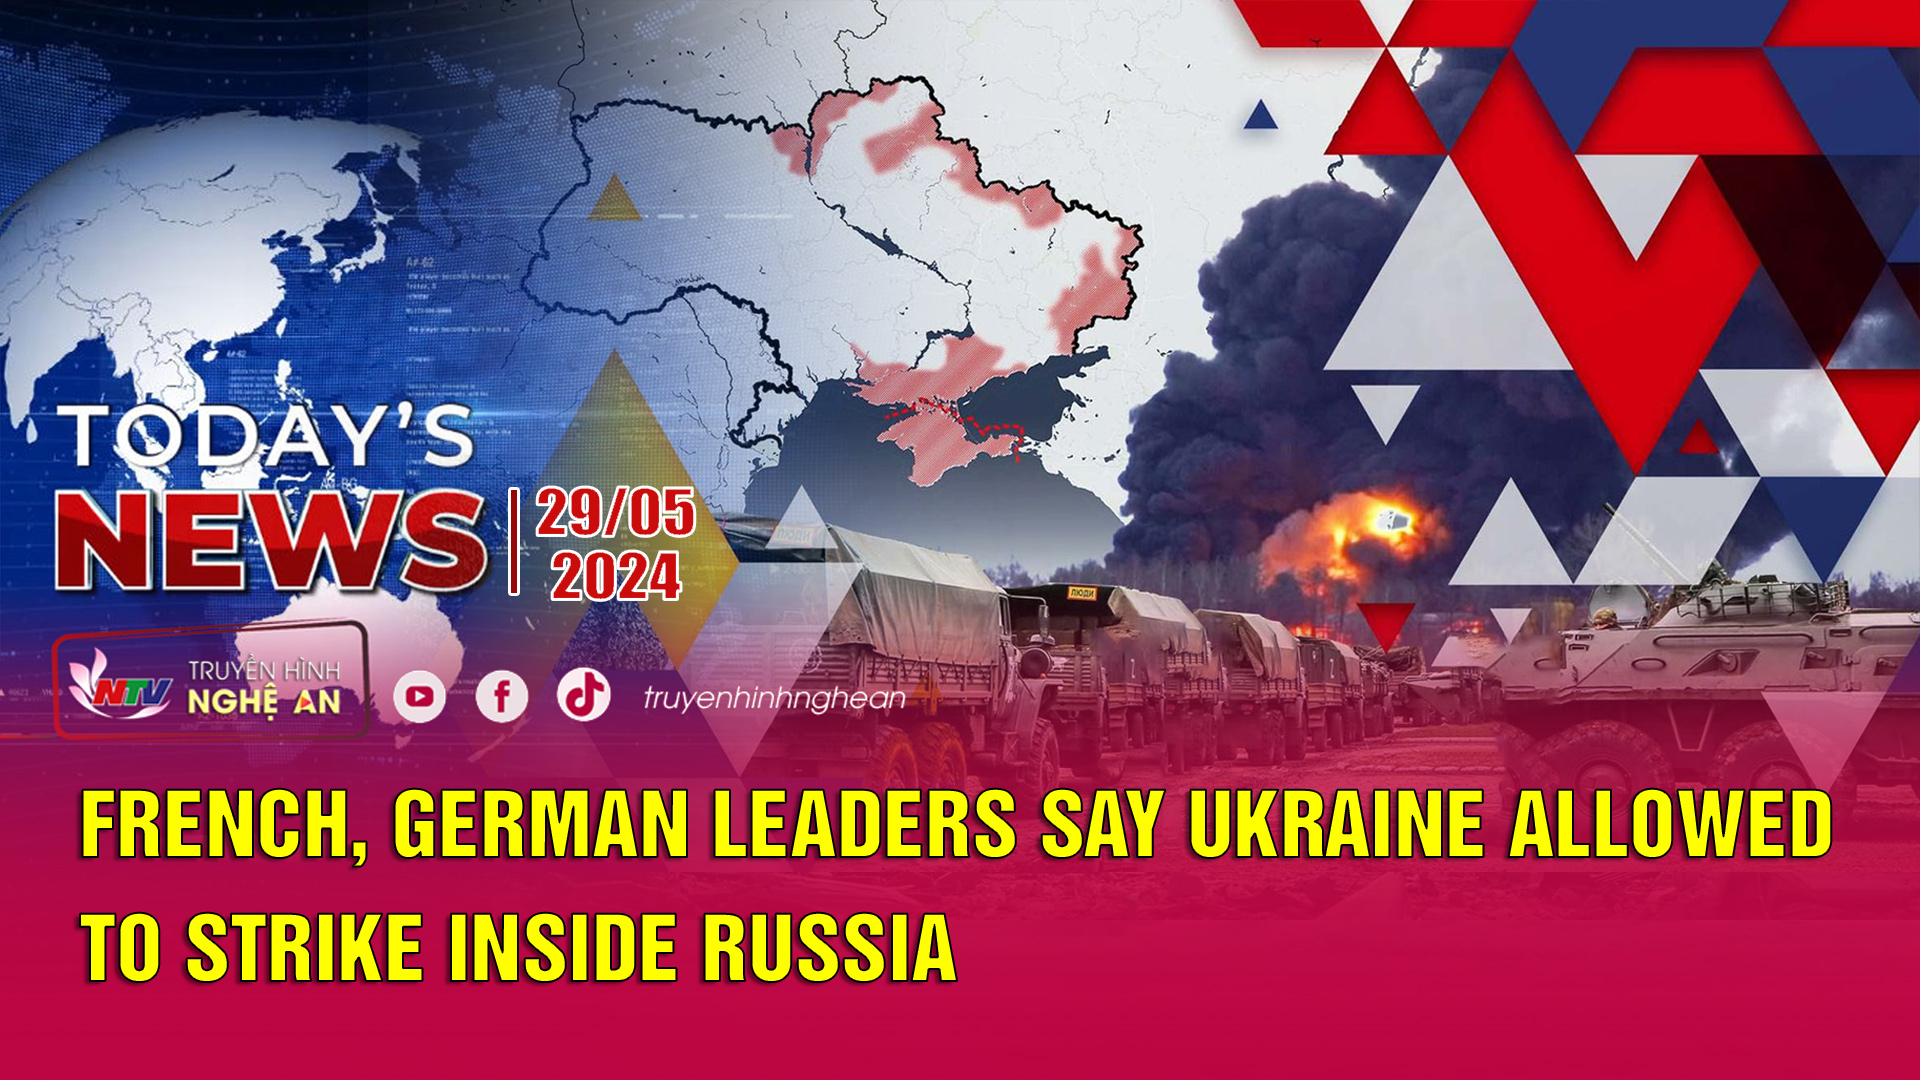 Today's News 29/05/2024: French, German leaders say Ukraine allowed to strike inside Russia